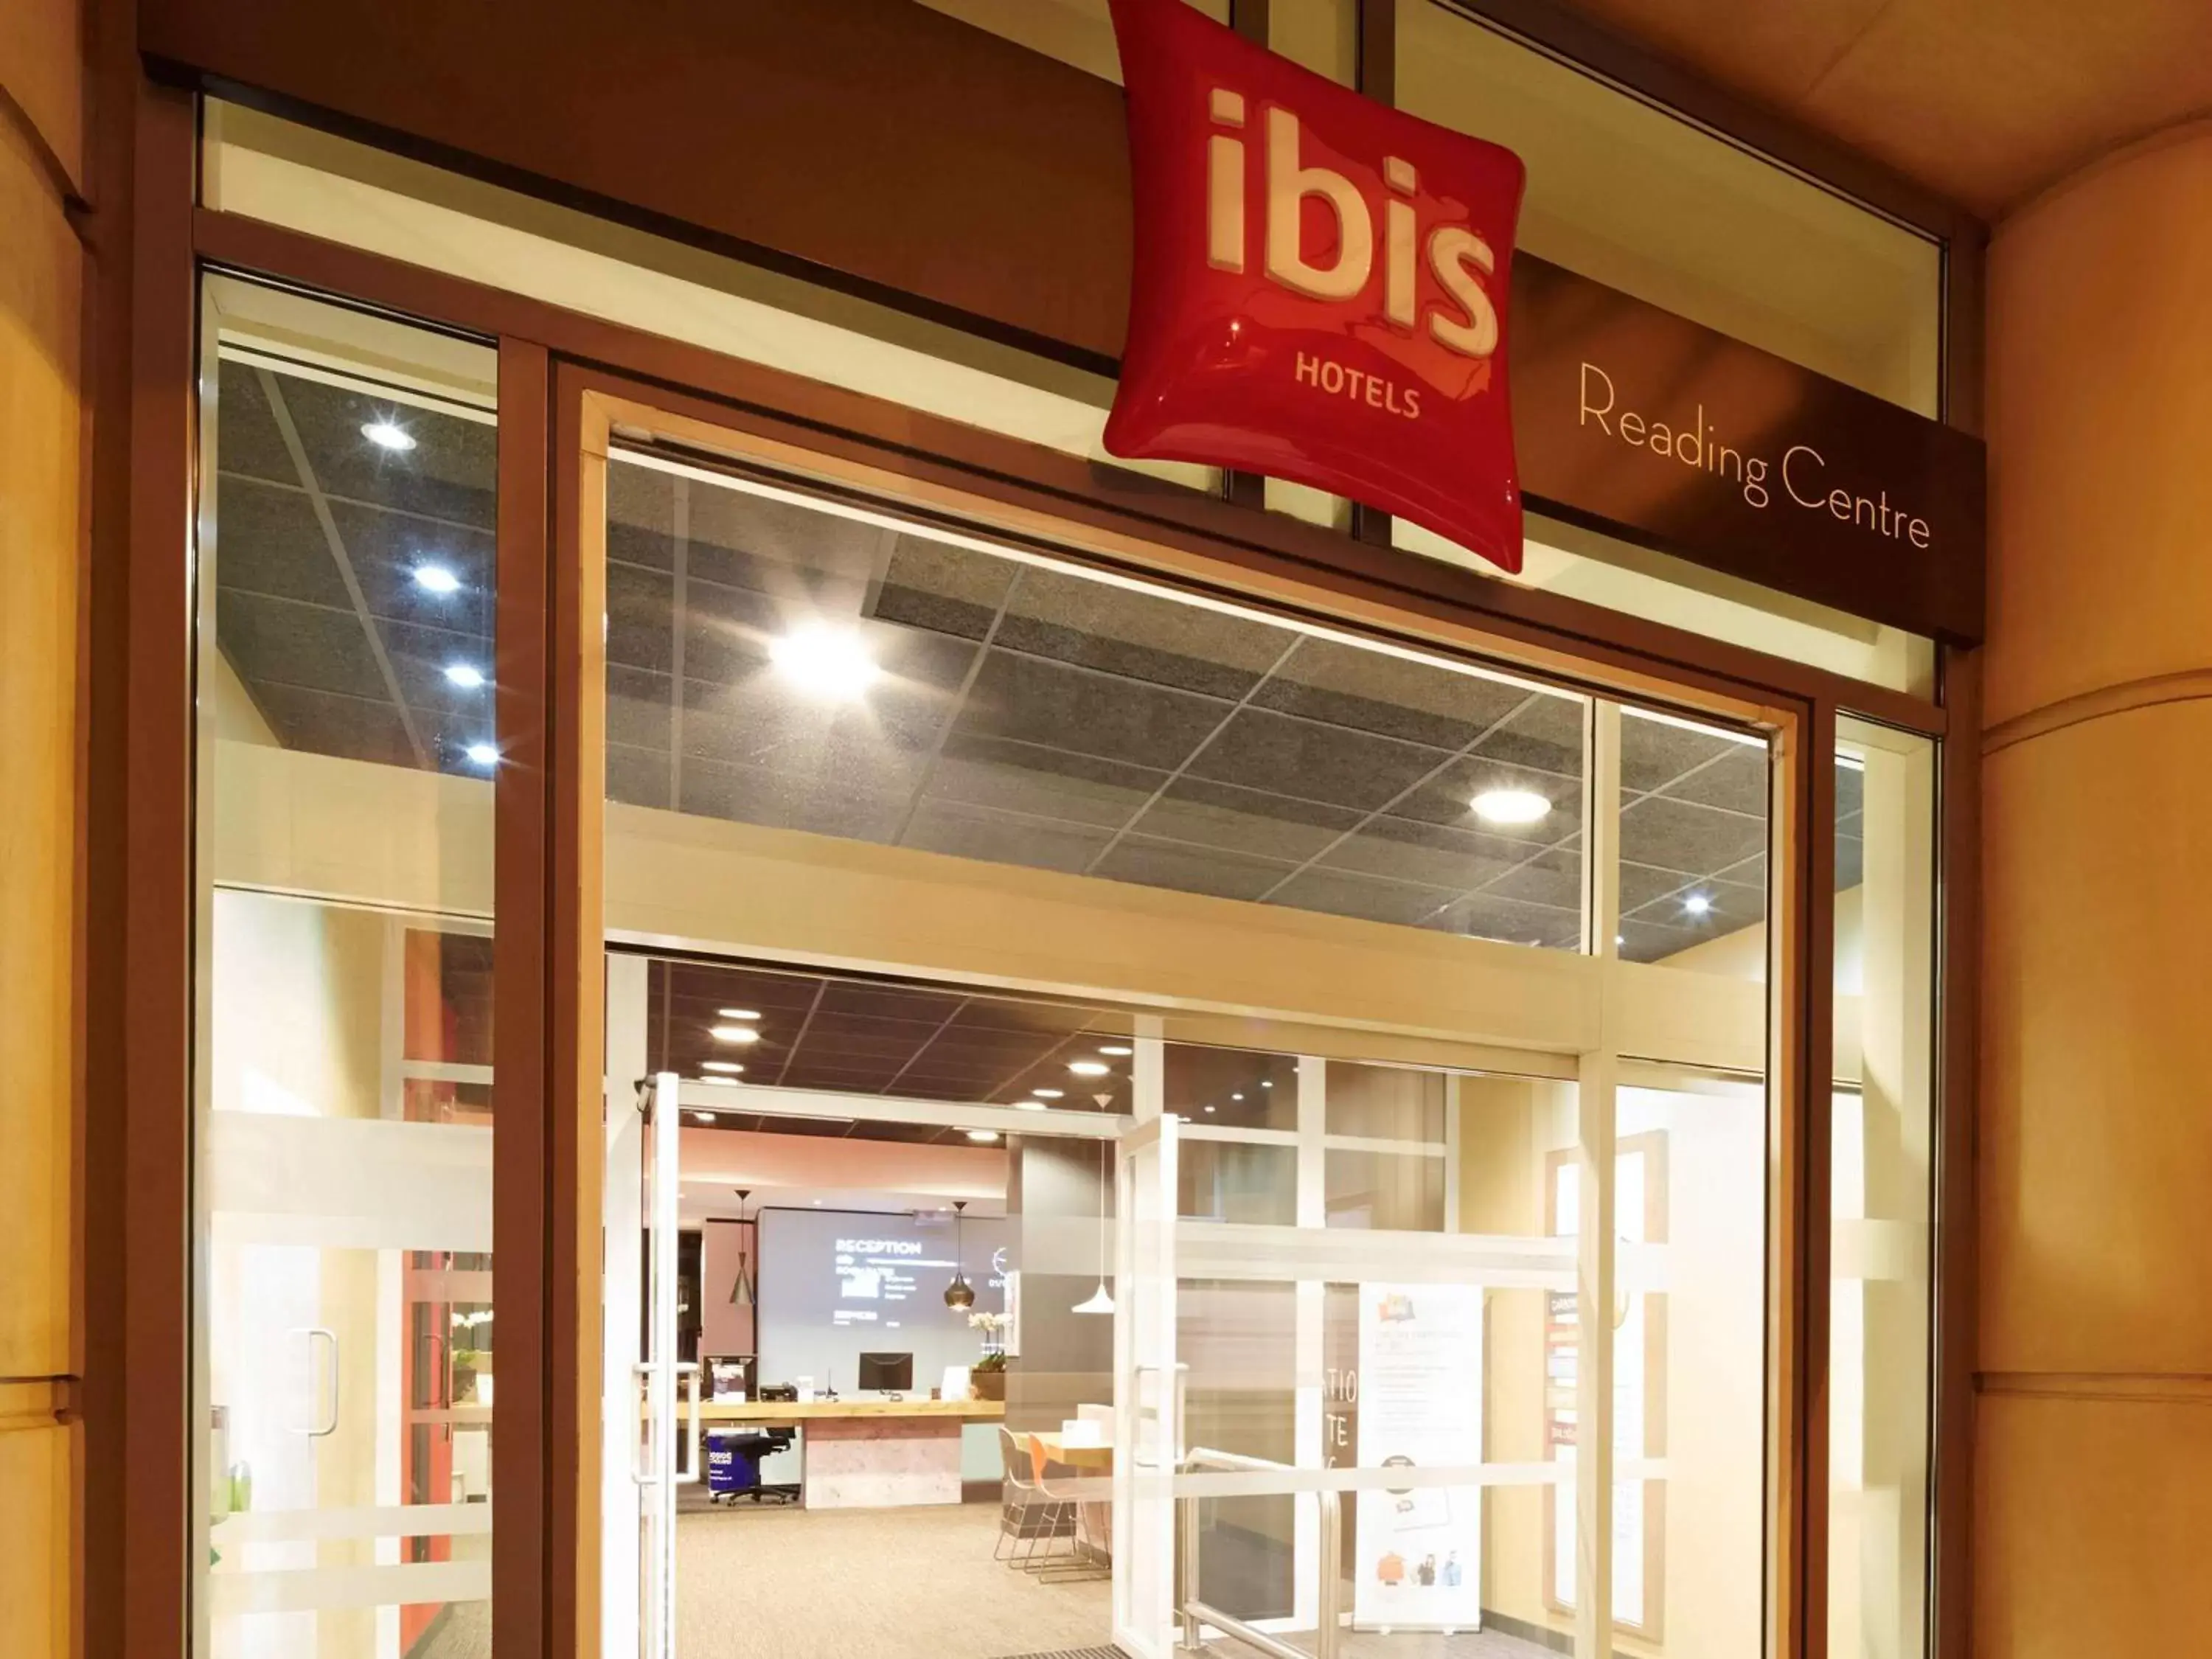 Property building in ibis Reading Centre